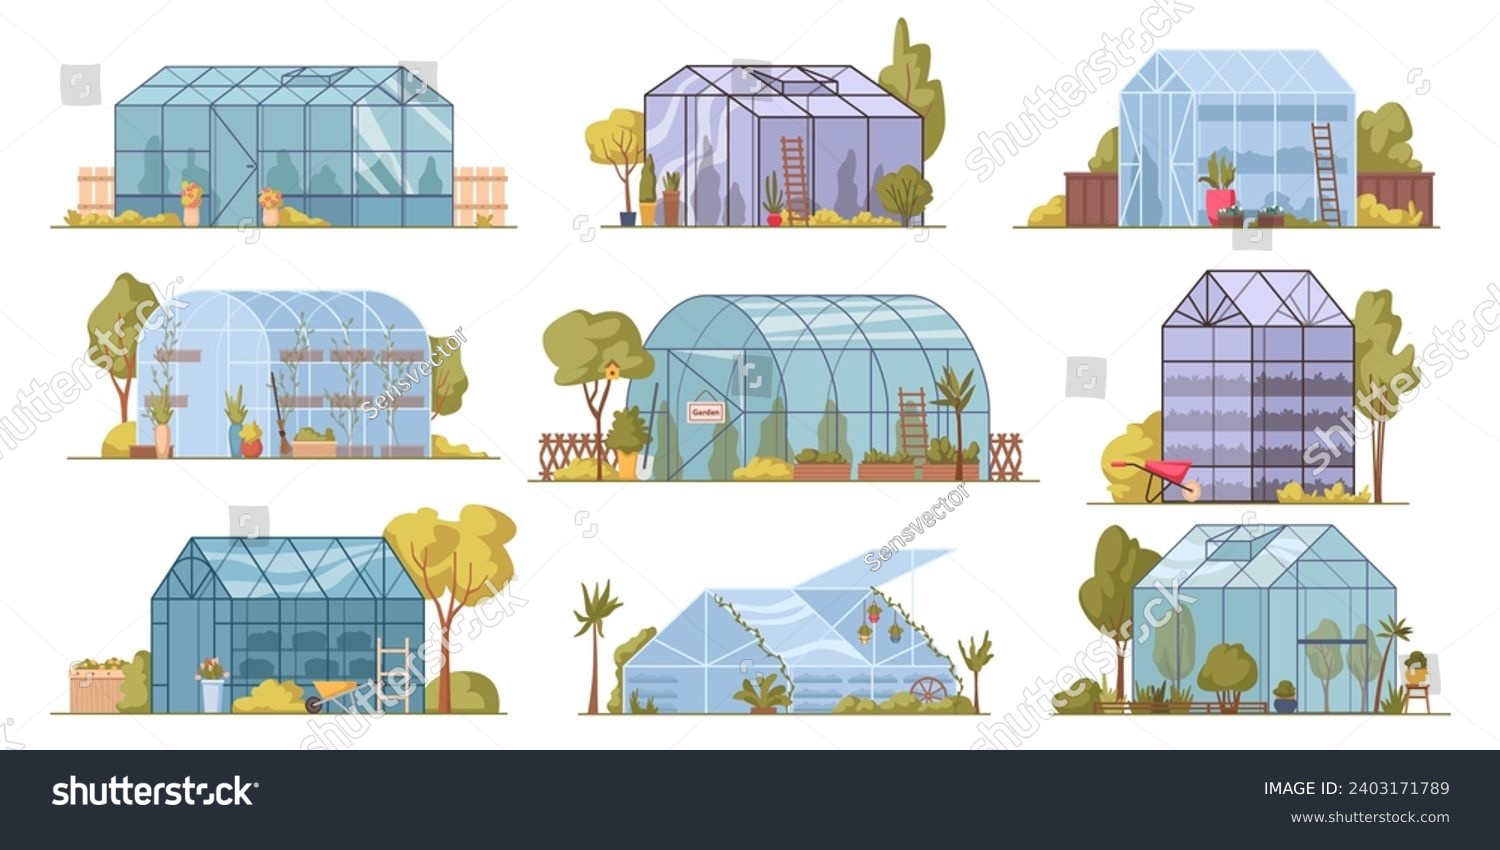 SVG of Glass orangery, botanical garden greenhouse with potted plants. Vector hothouse for growing crops and agriculture. Glasshouse for homegrown products, natural and organic cultivation of ingredients svg